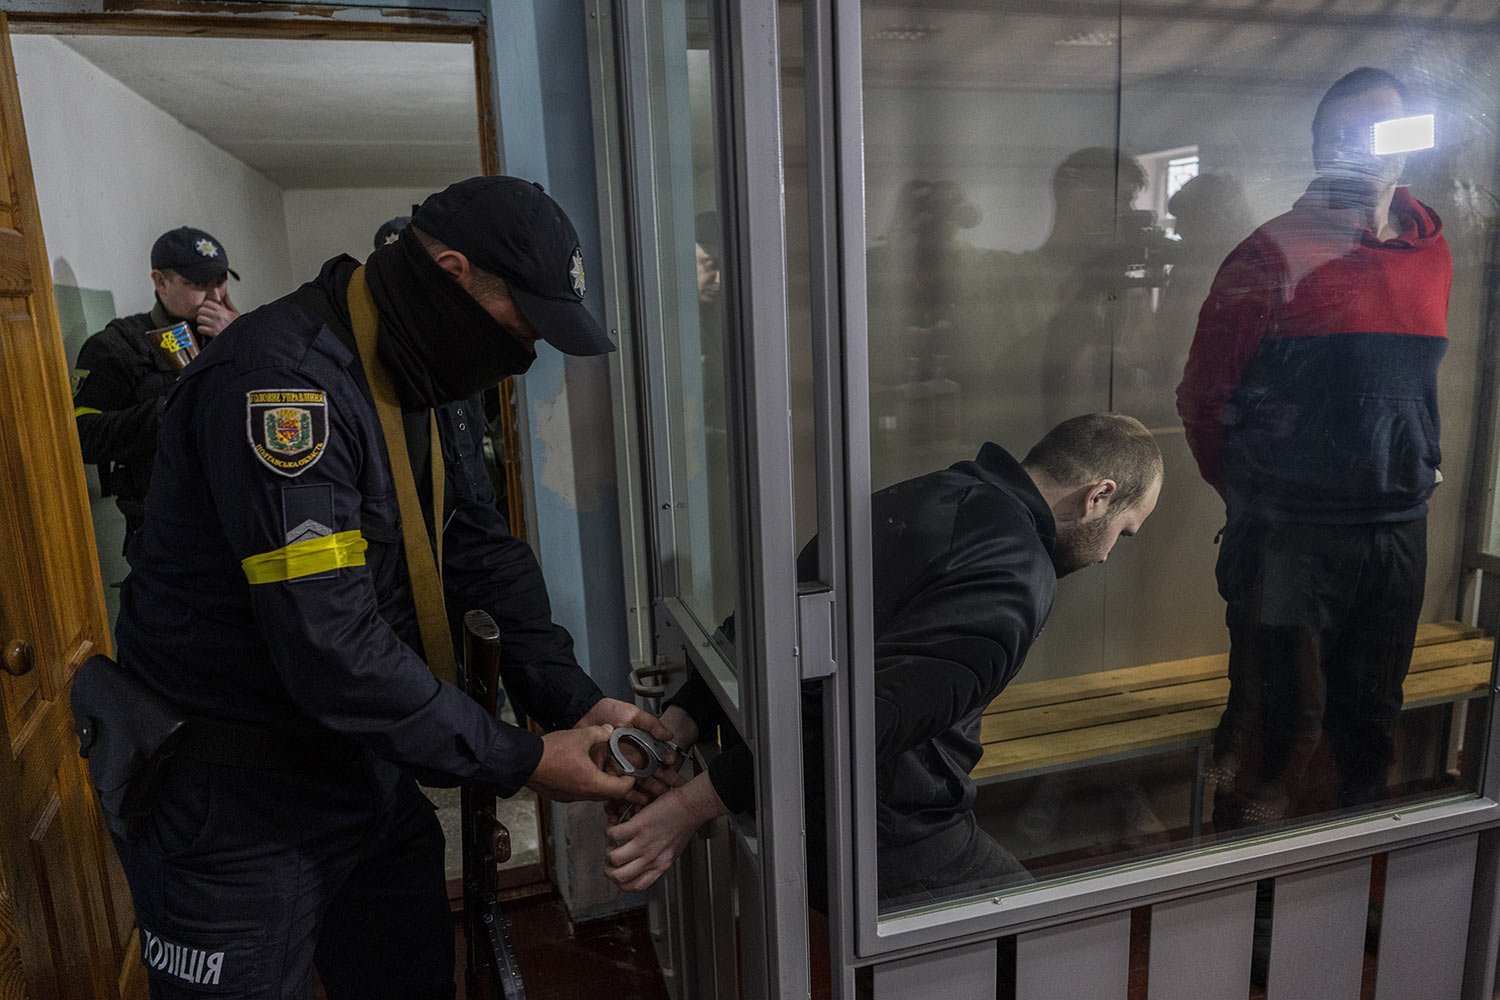  Captured Russian soldiers Alexander Alexeevich Ivanov and Alexander Vladimirovich Bobykin, right, leave the courtroom after their trial, accused of war crimes in Ukraine, in Kotelva, northeastern Ukraine, Thursday, May 26, 2022. (AP Photo/Bernat Arm